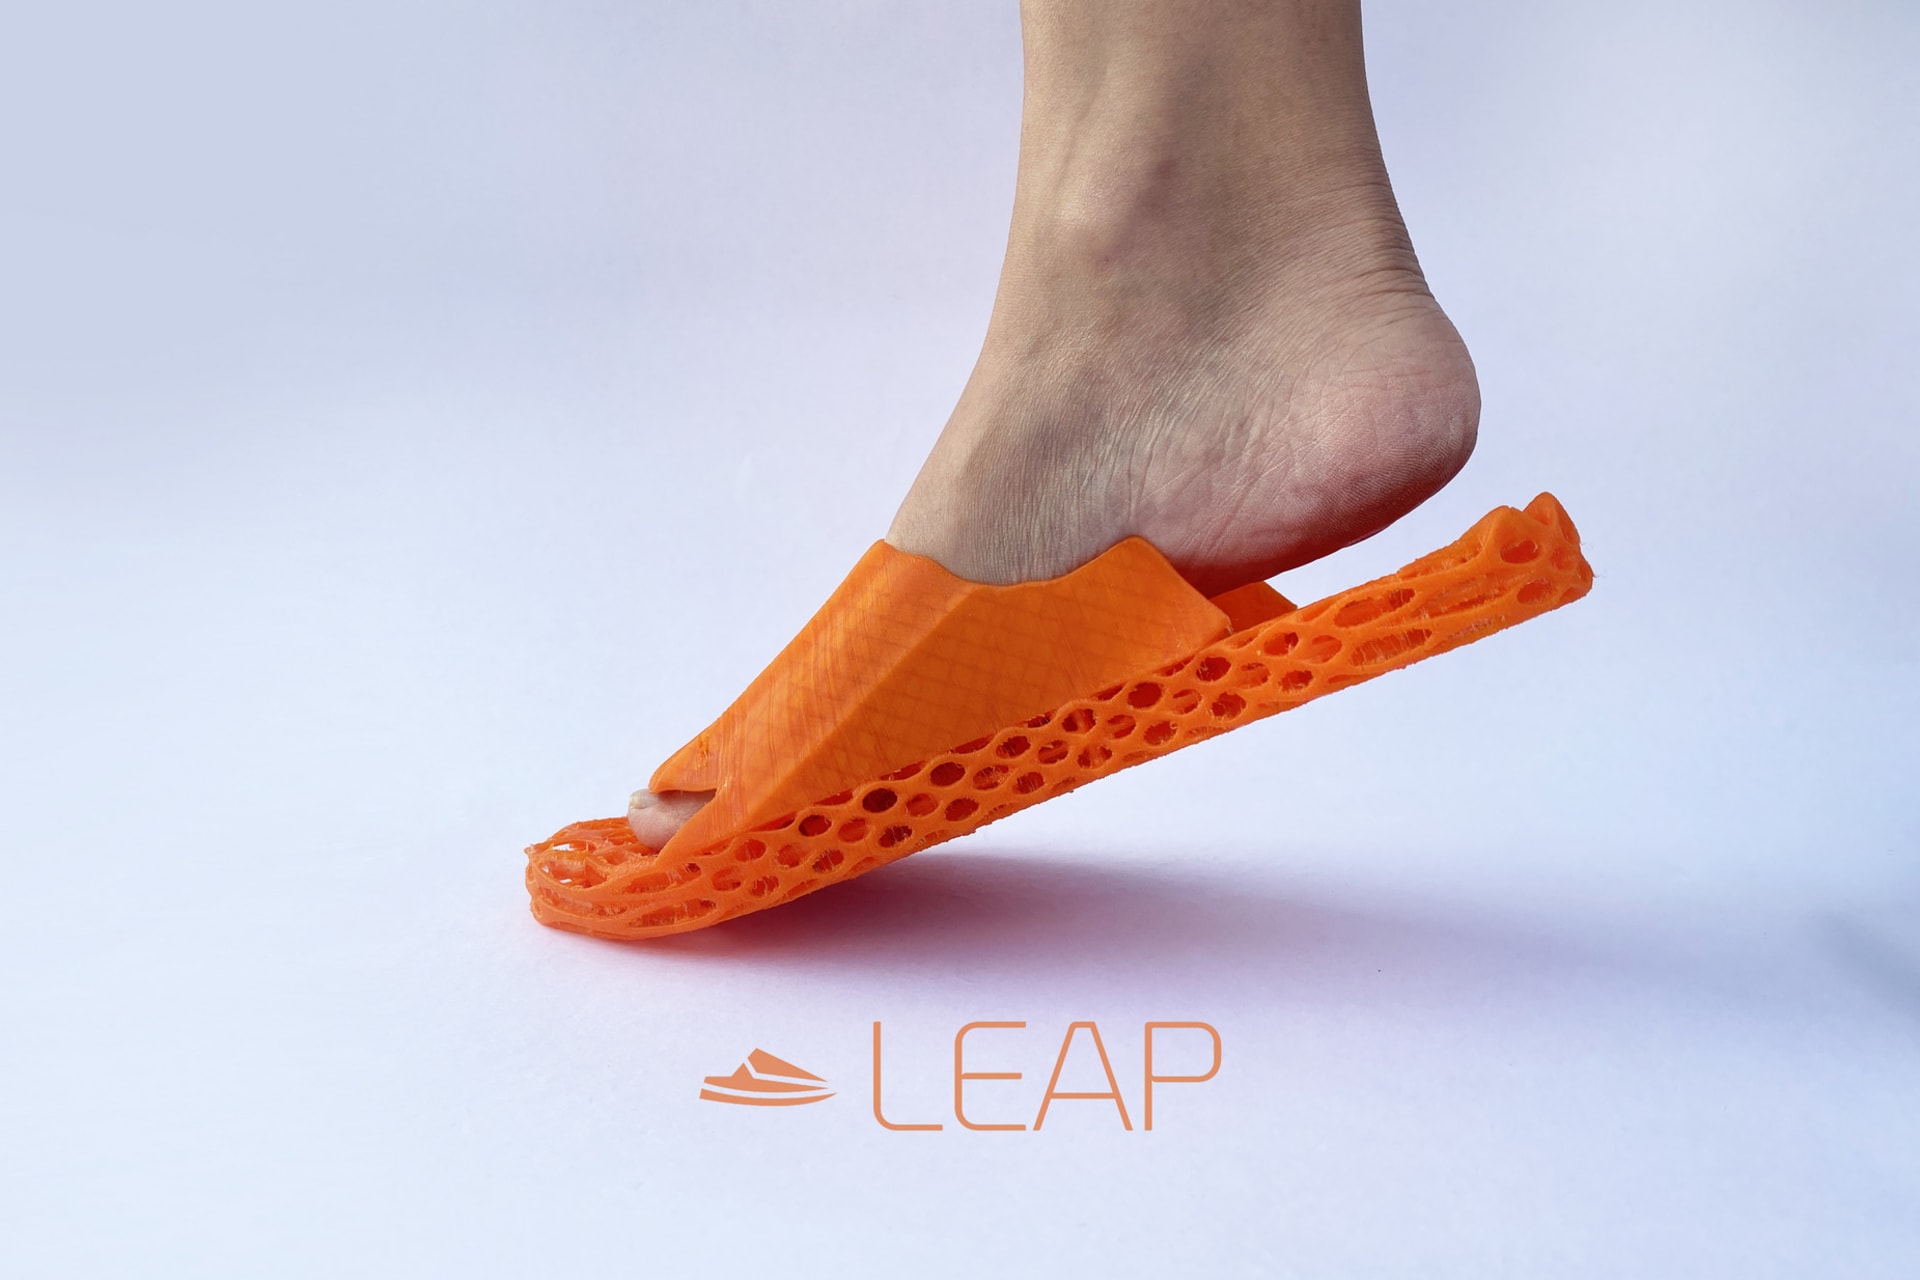 3D Printed shoe design and brand name LEAP